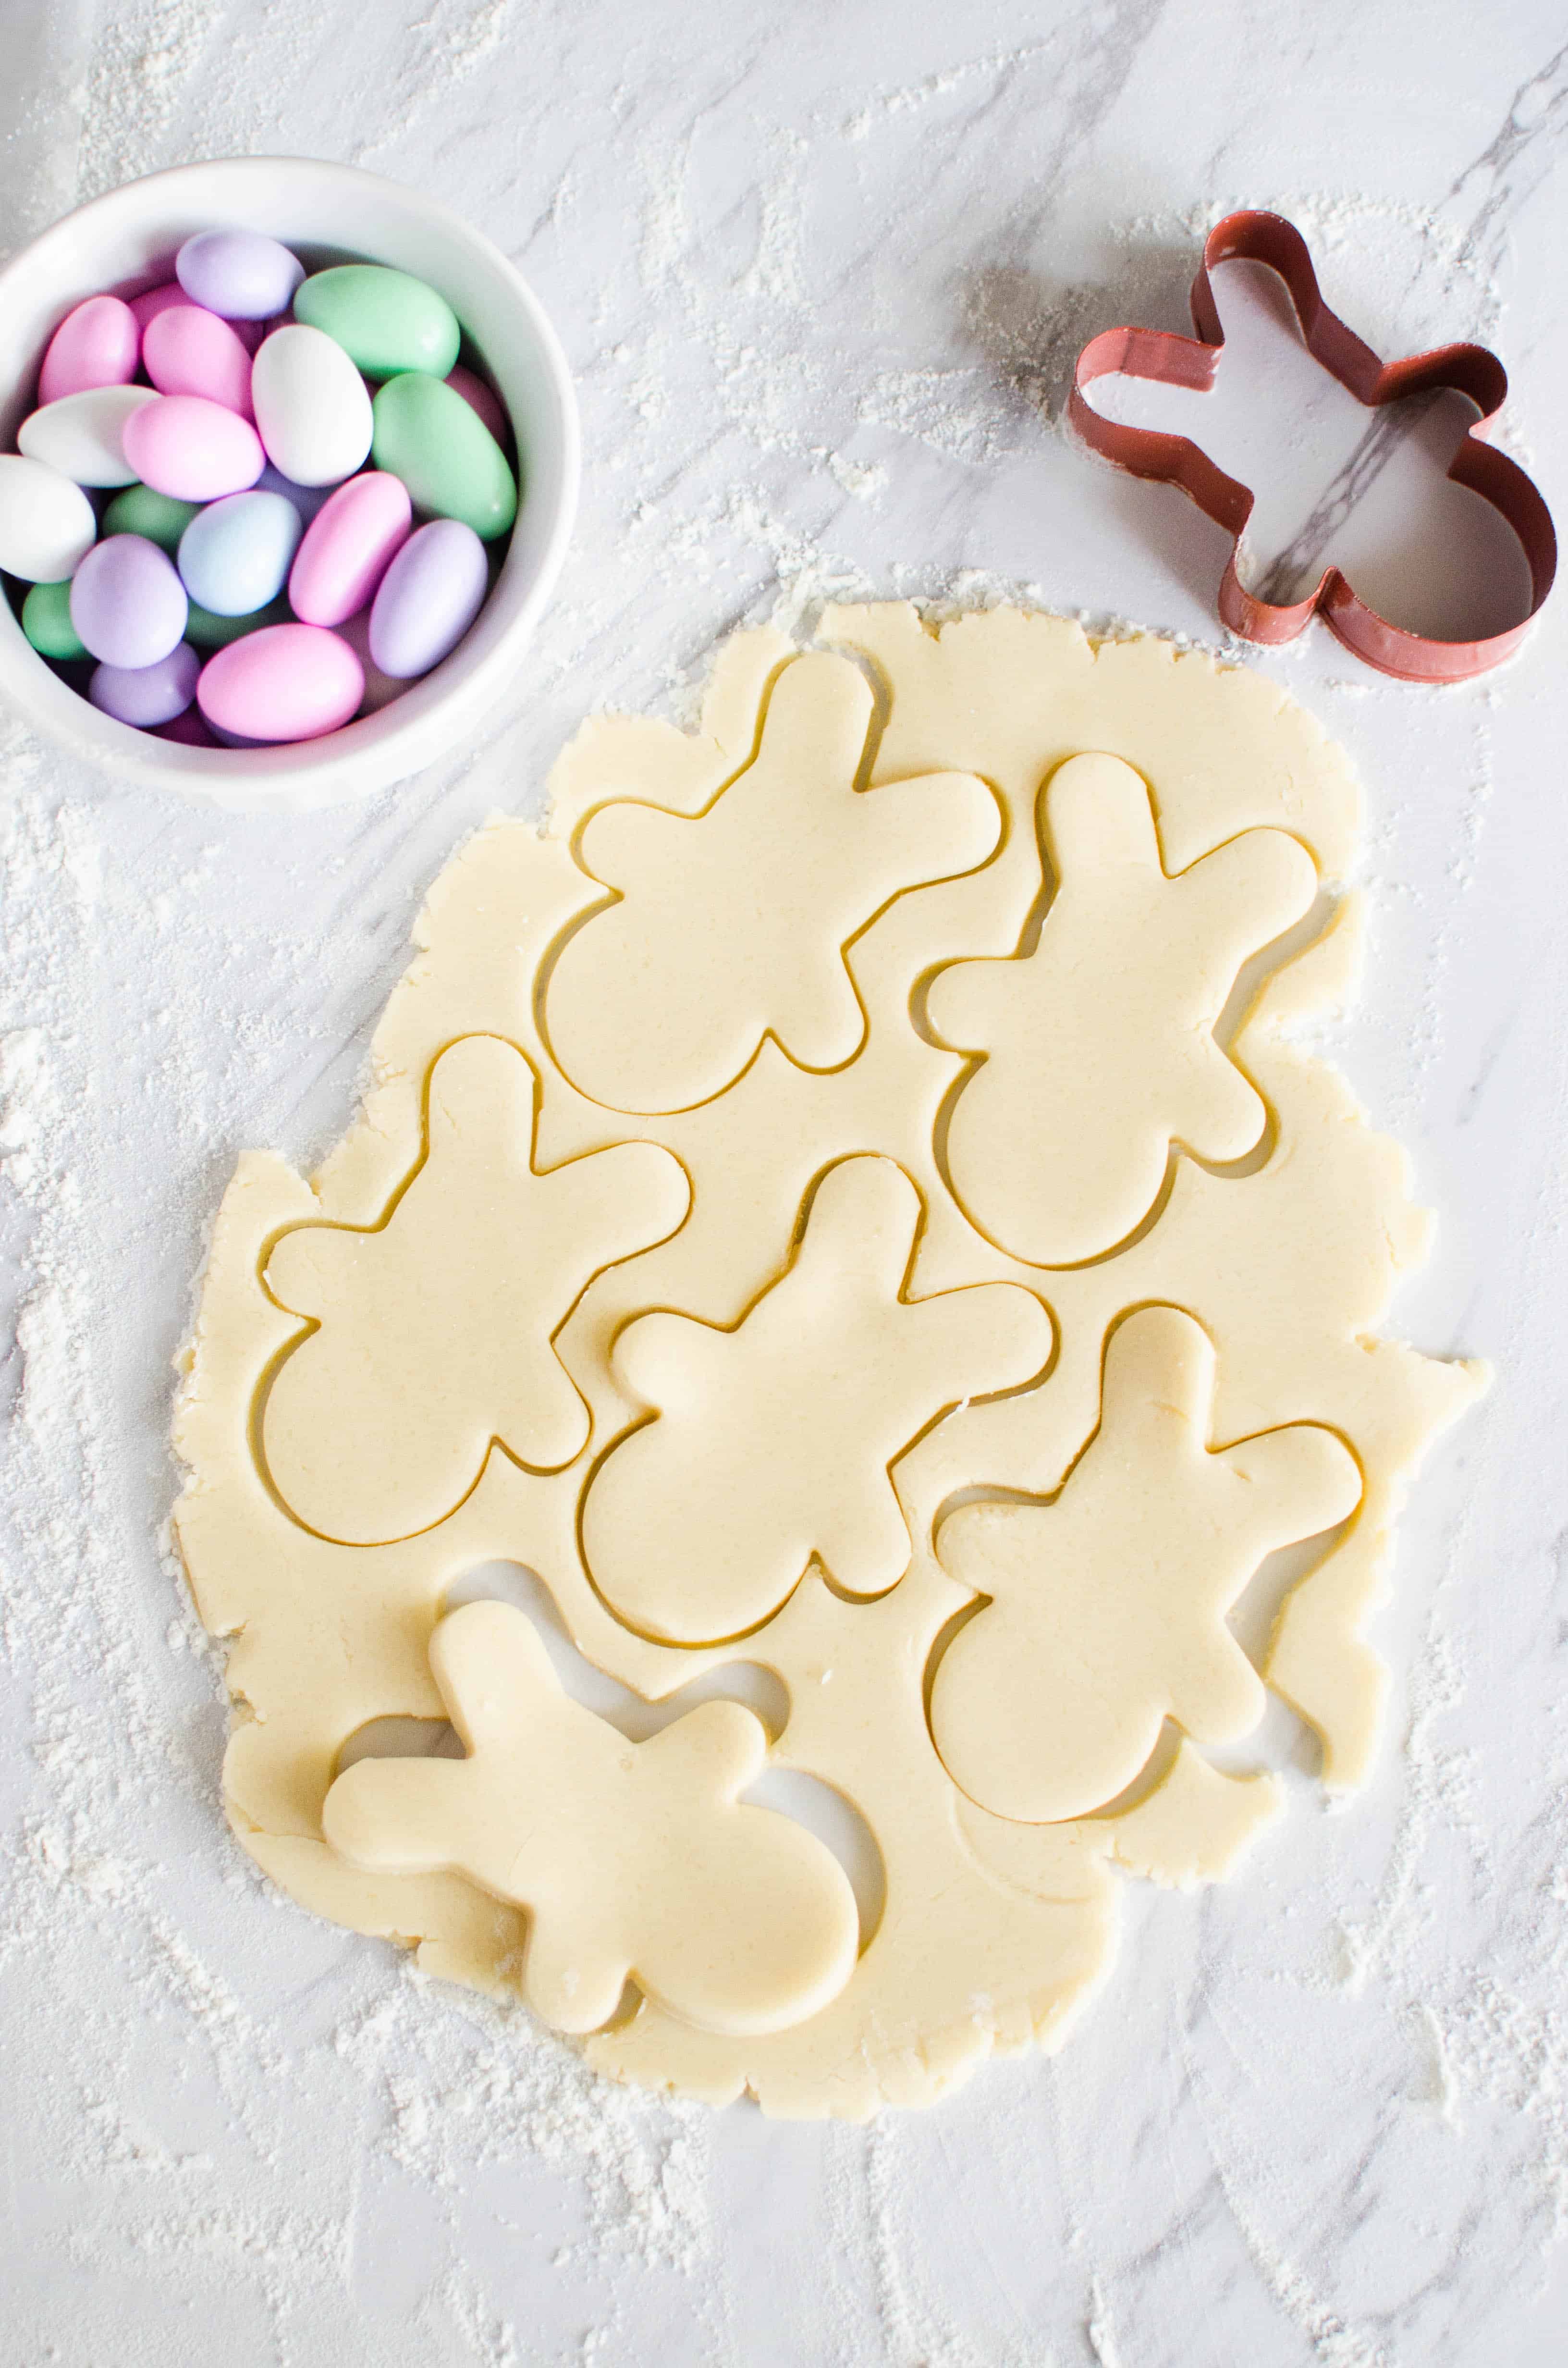 Sugar cookie dough with bunny shaped cutouts